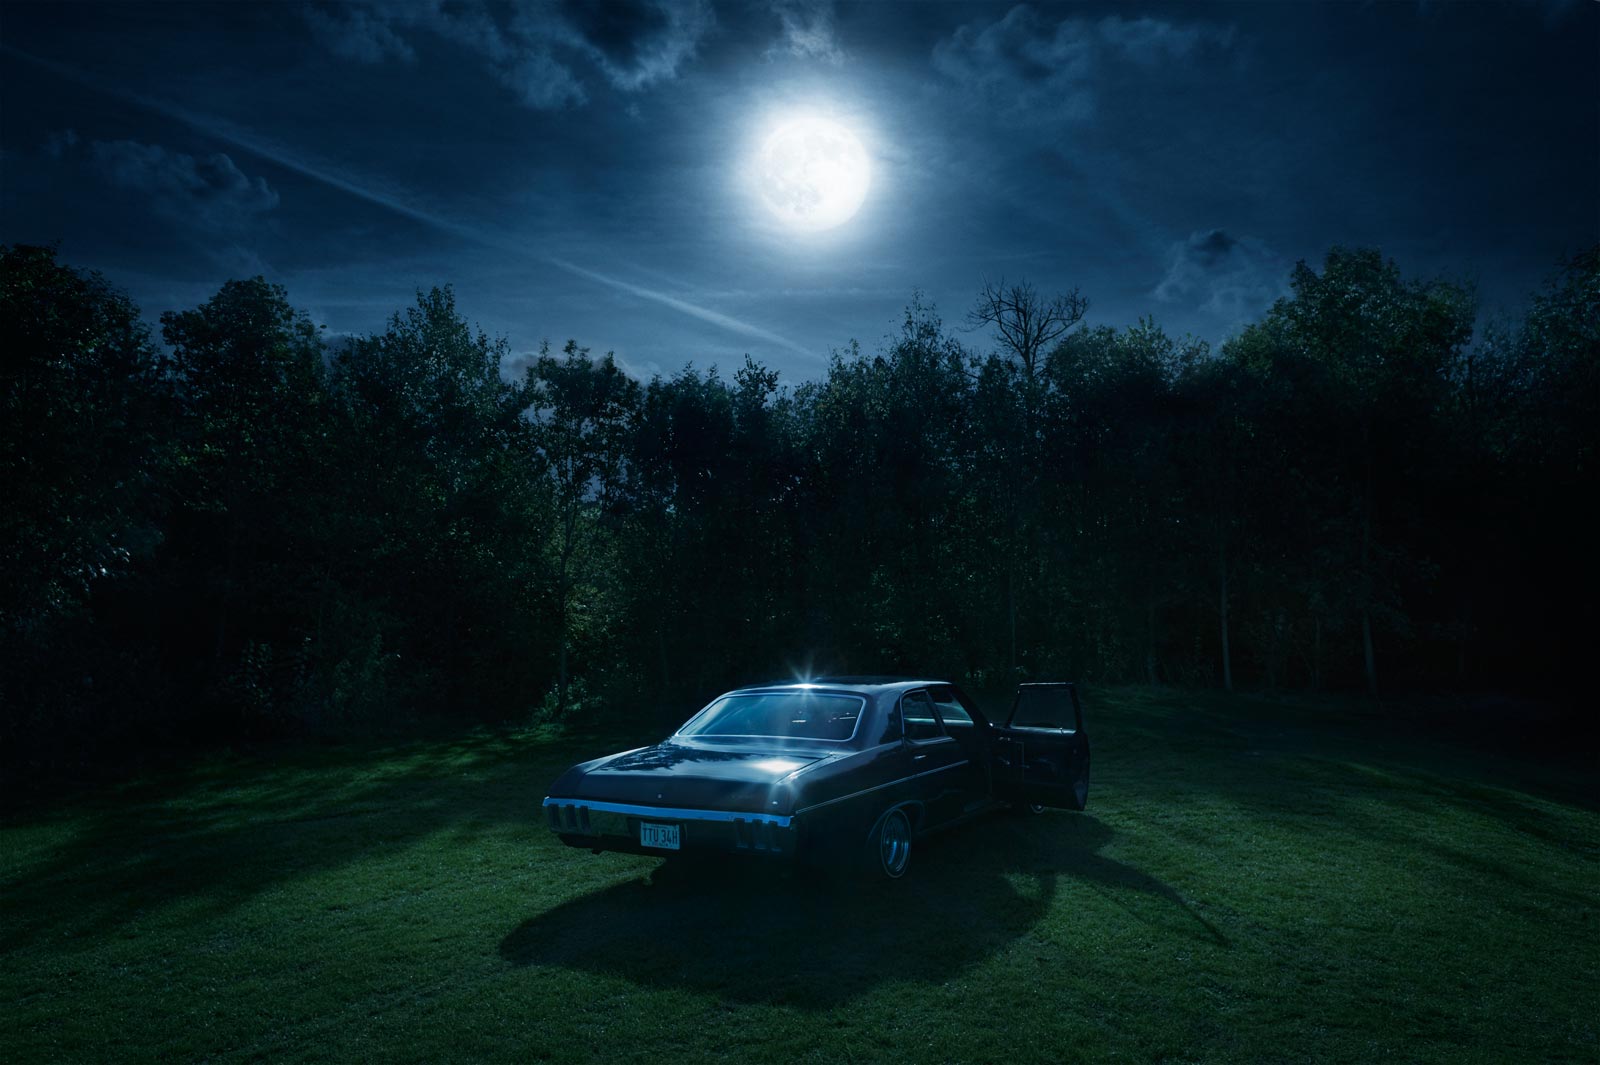 Chevy Unfer Moon, 2007